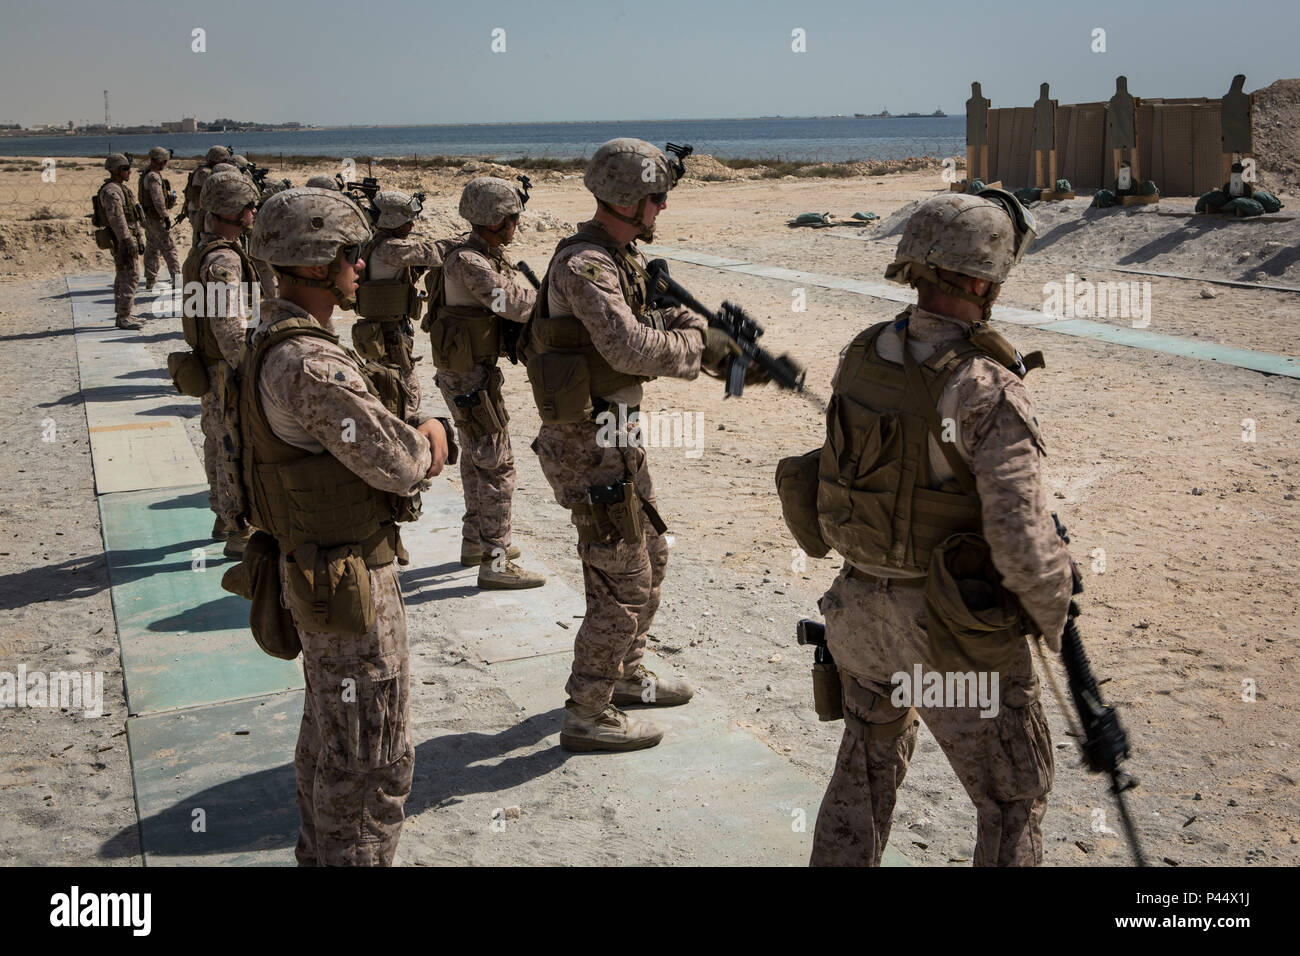 U.S. Marines with Company C, Marine Wing Support Squadron 373, Special Purpose Marine Air Ground Task Force - Crisis Response - Central Command, conduct rifle to pistol transitions during a combat marksmanship practice range at an undisclosed location in Southwest Asia, June 5, 2016. SPMAGTF-CR-CC is forward deployed in several host nations, with the ability to respond to a variety of contingencies rapidly and effectively. (U.S. Marine Corps photo by Sgt. Donald Holbert/ Released) Stock Photo